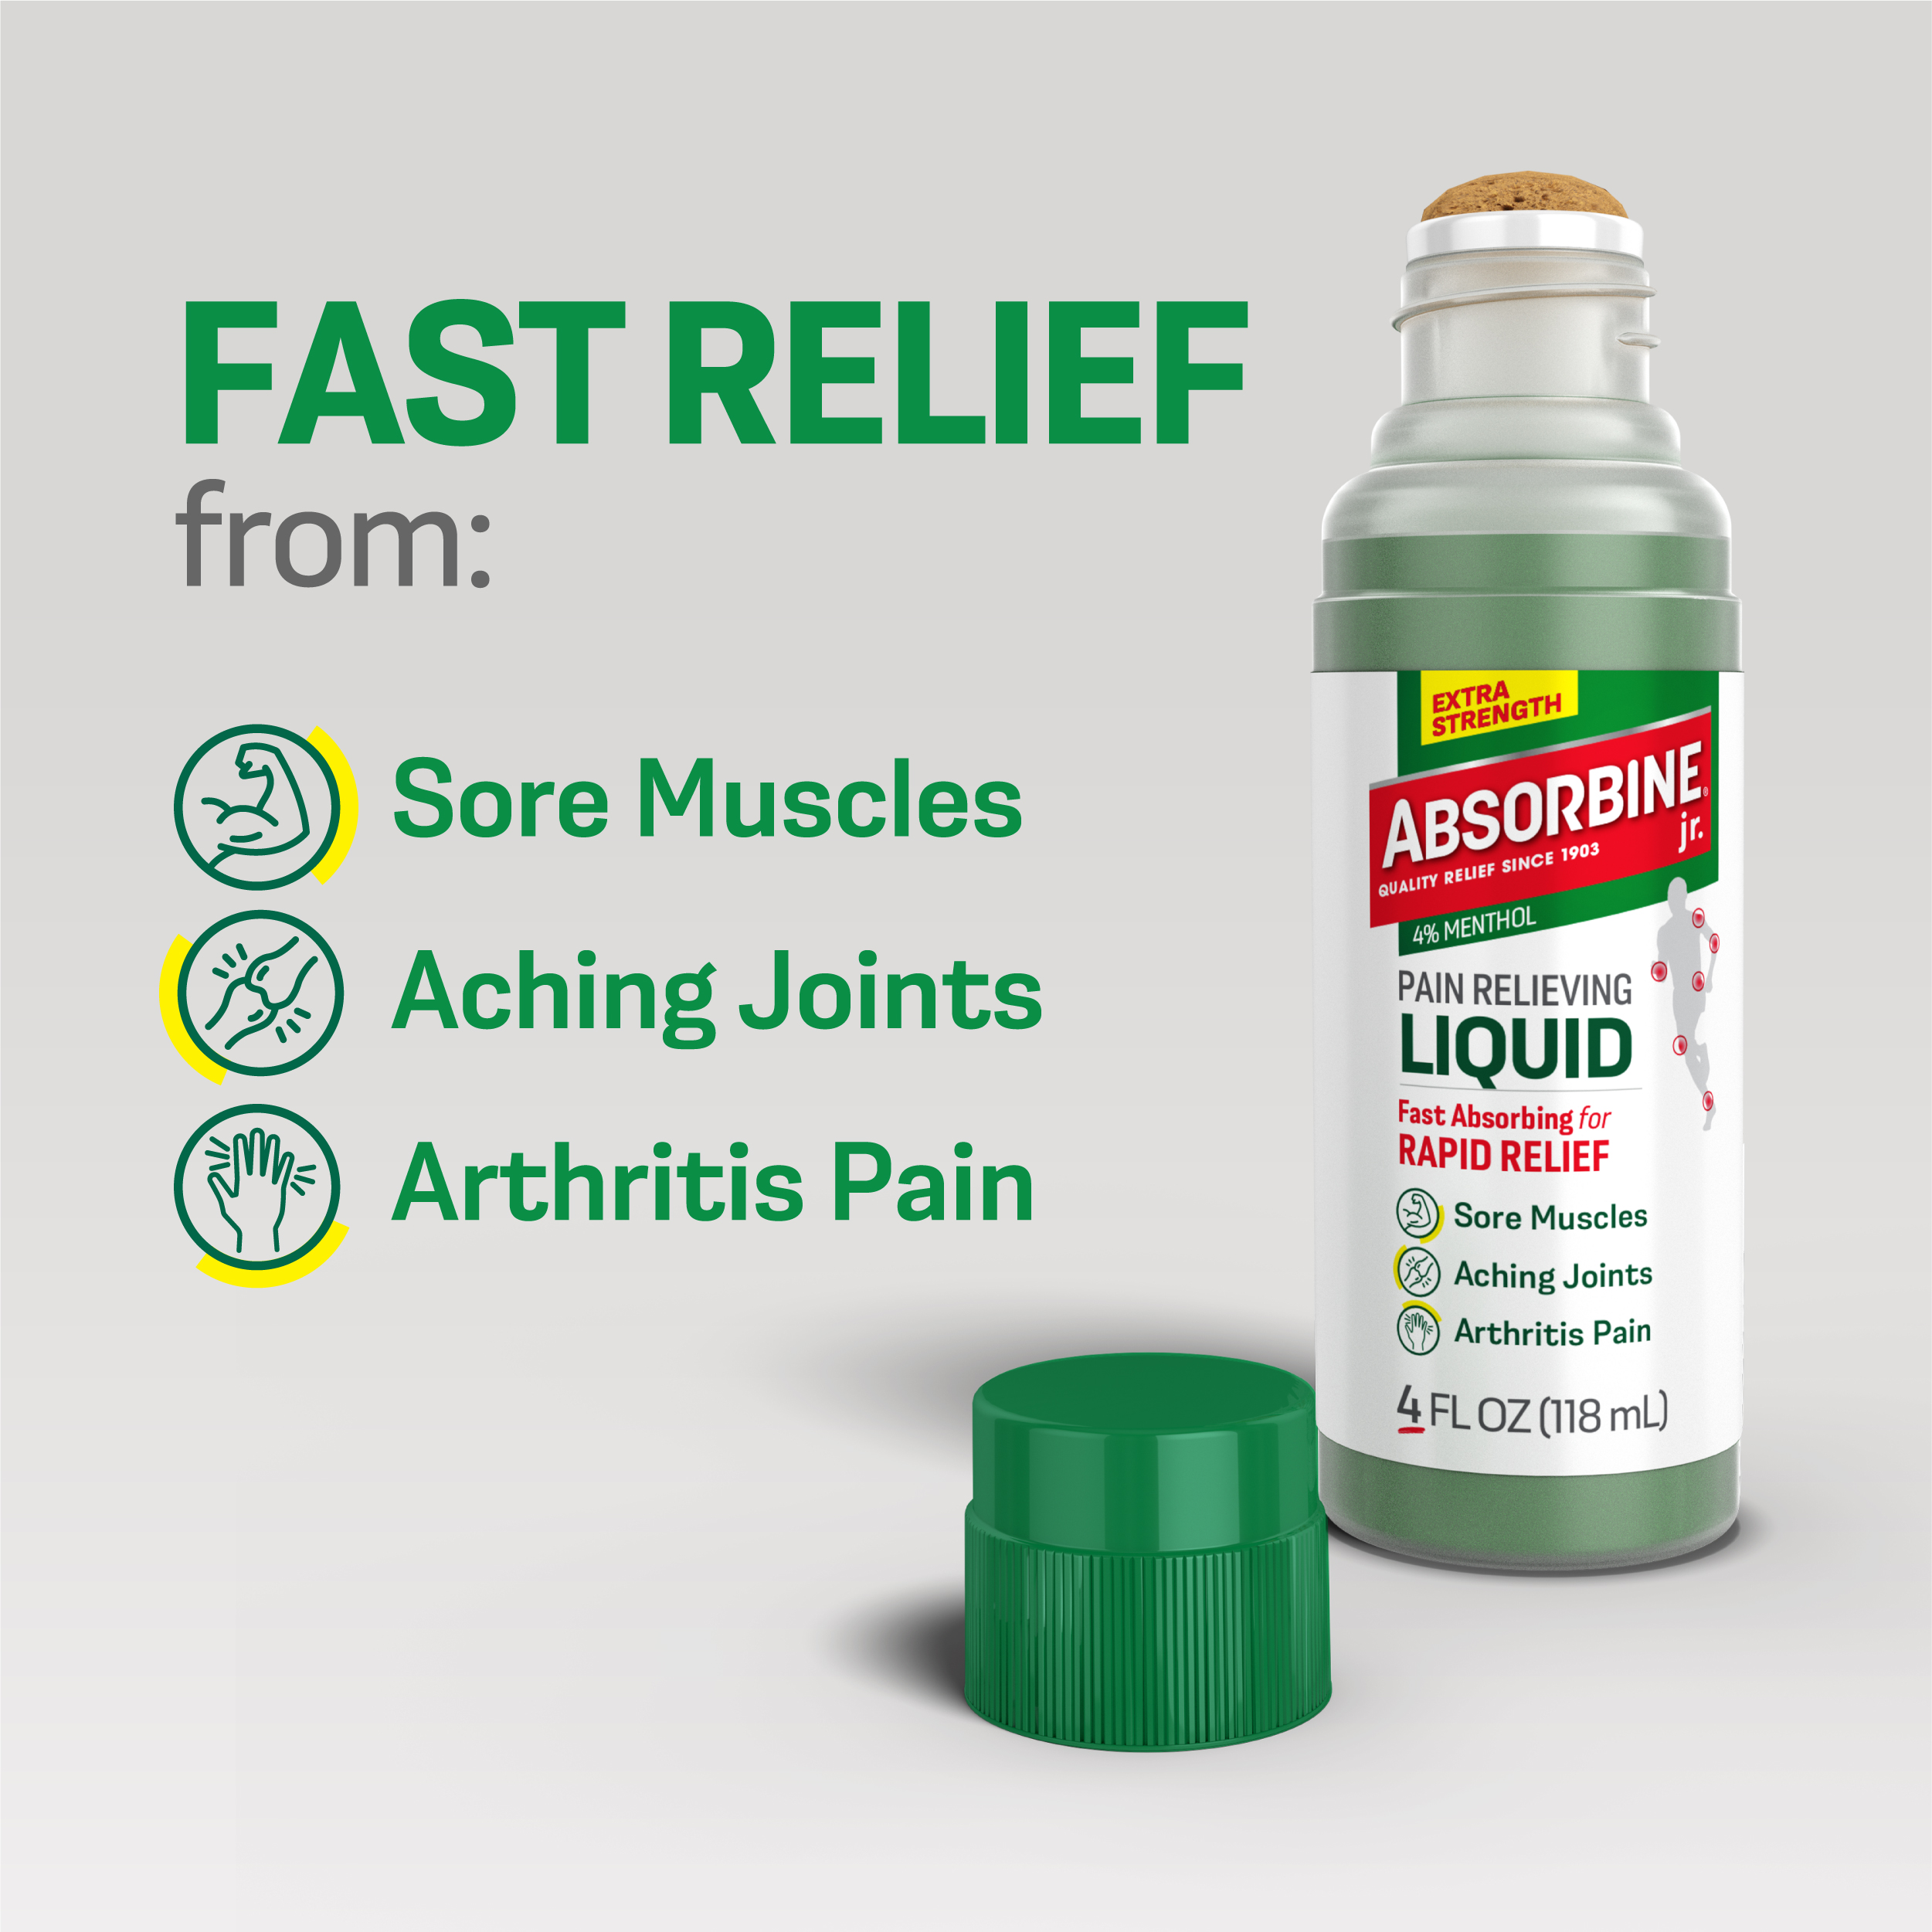 Absorbine Jr. Pain Relieving Liquid with Menthol for Sore Muscles, Joint Aches and Arthritis Pain Relief, 4oz - image 3 of 8